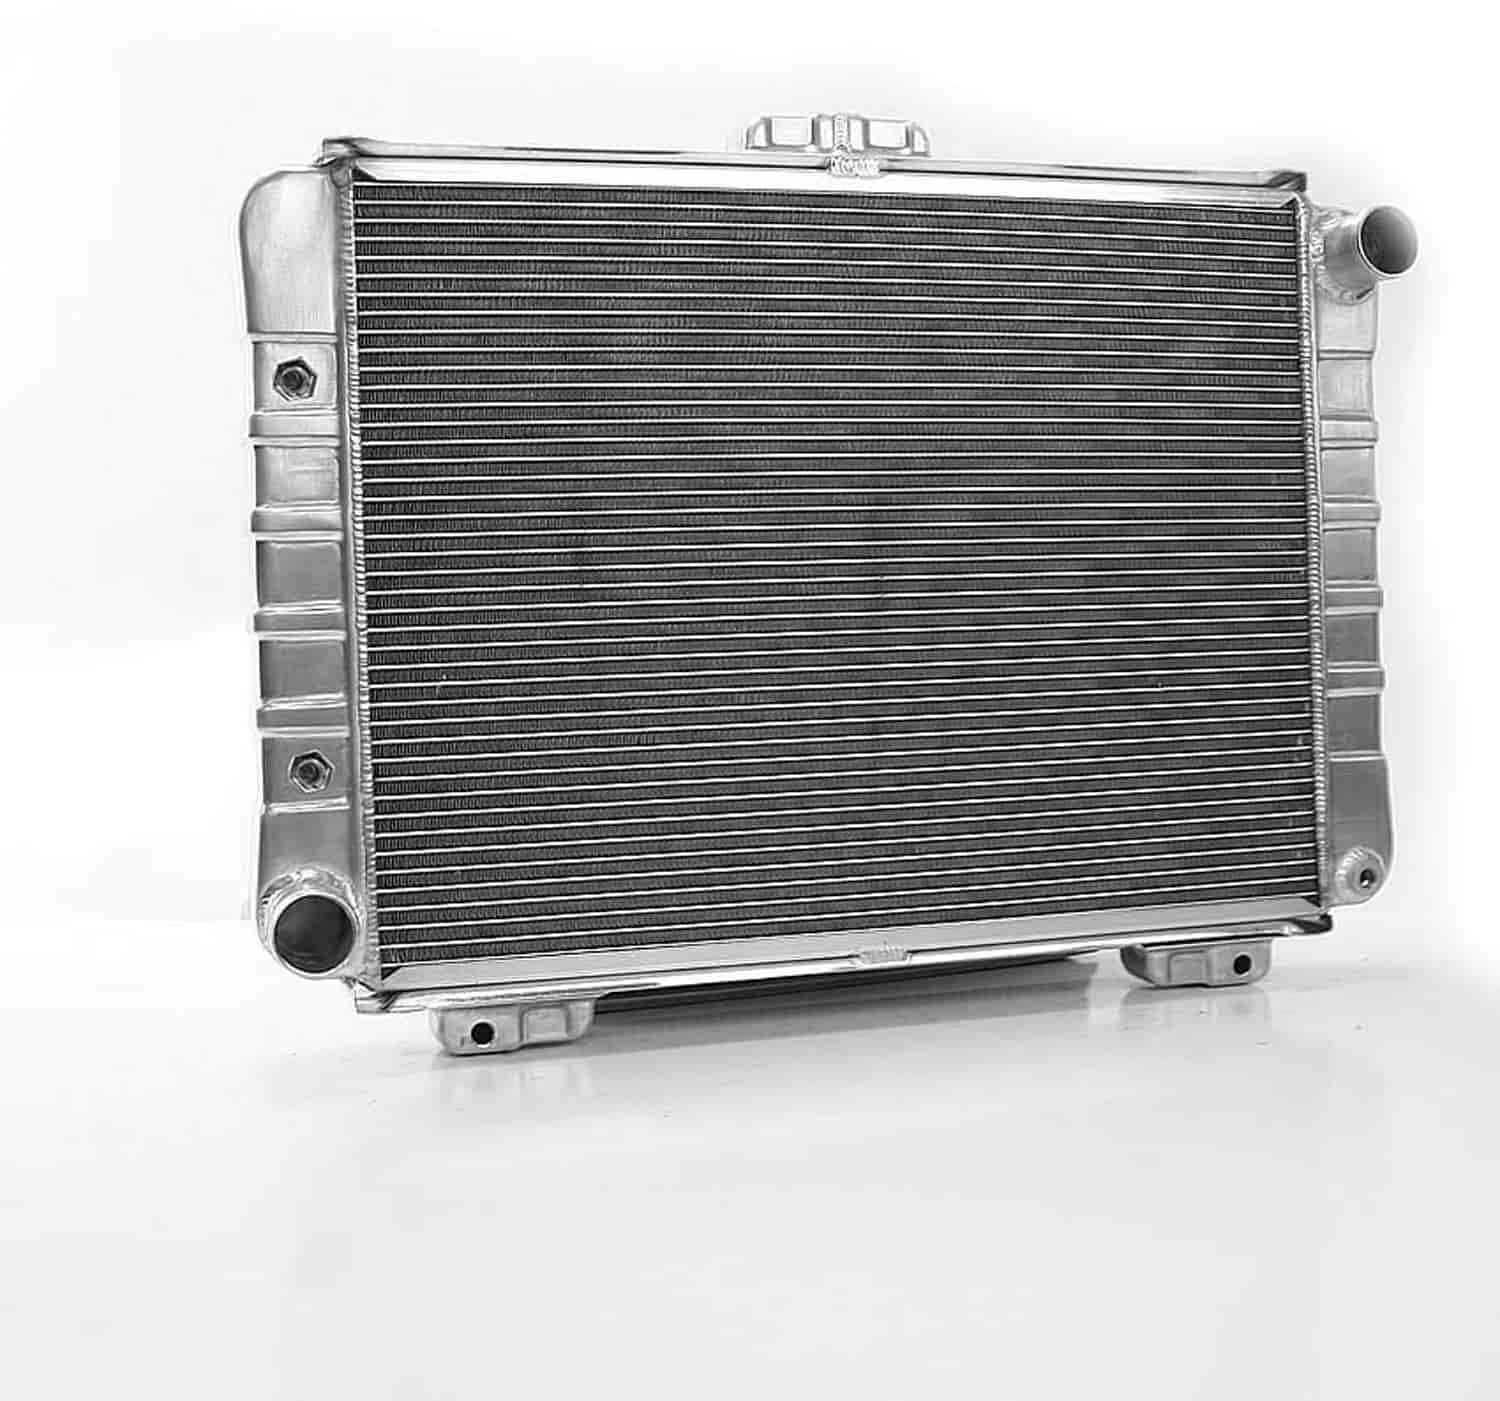 ExactFit Radiator for 1964 Galaxie/Thunderbolt with Late Small Block & Big Block